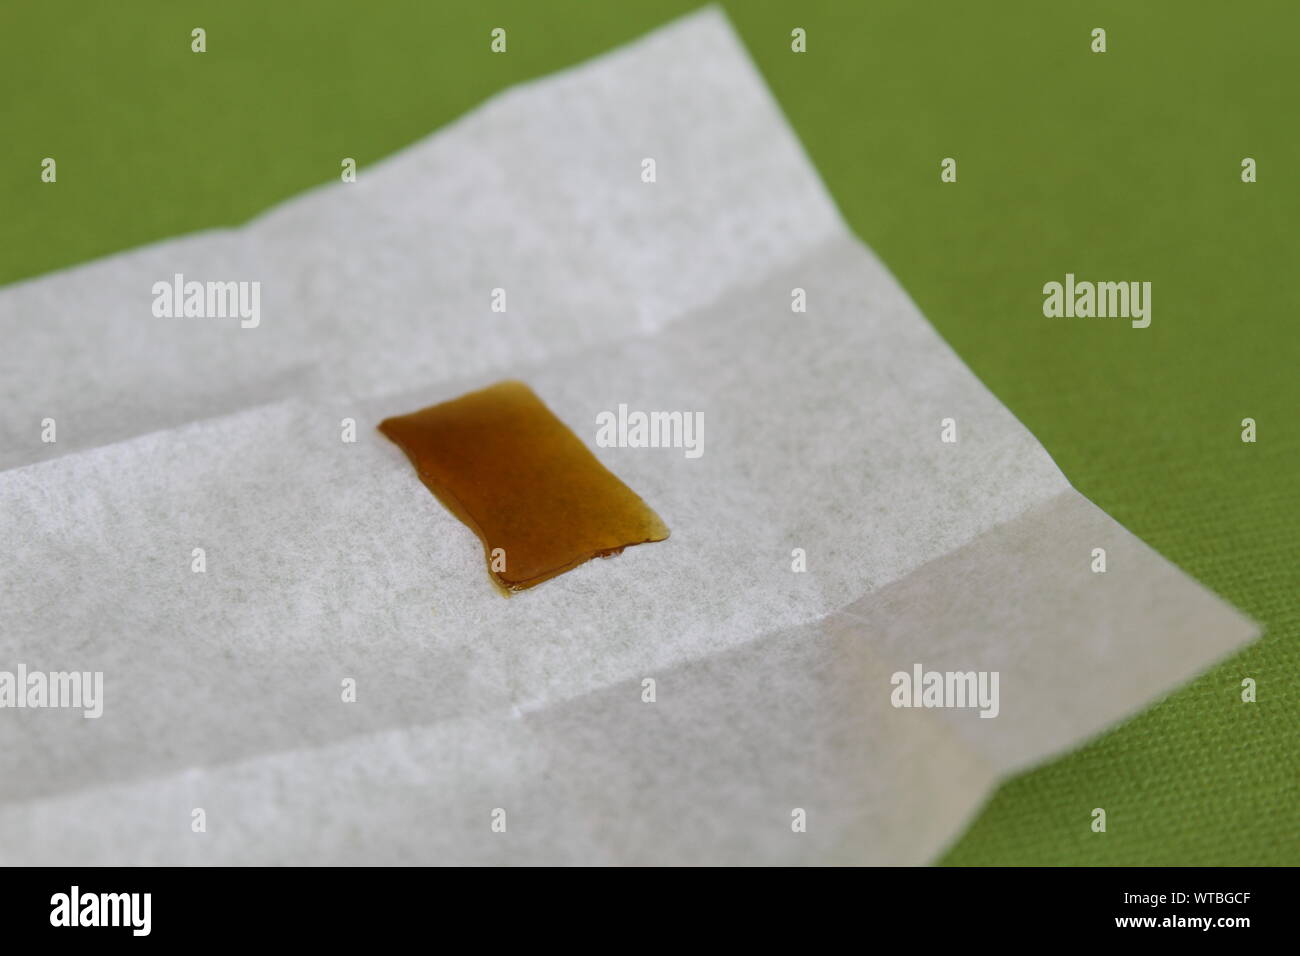 Shatter - Cannabis Concentrate Stock Photo